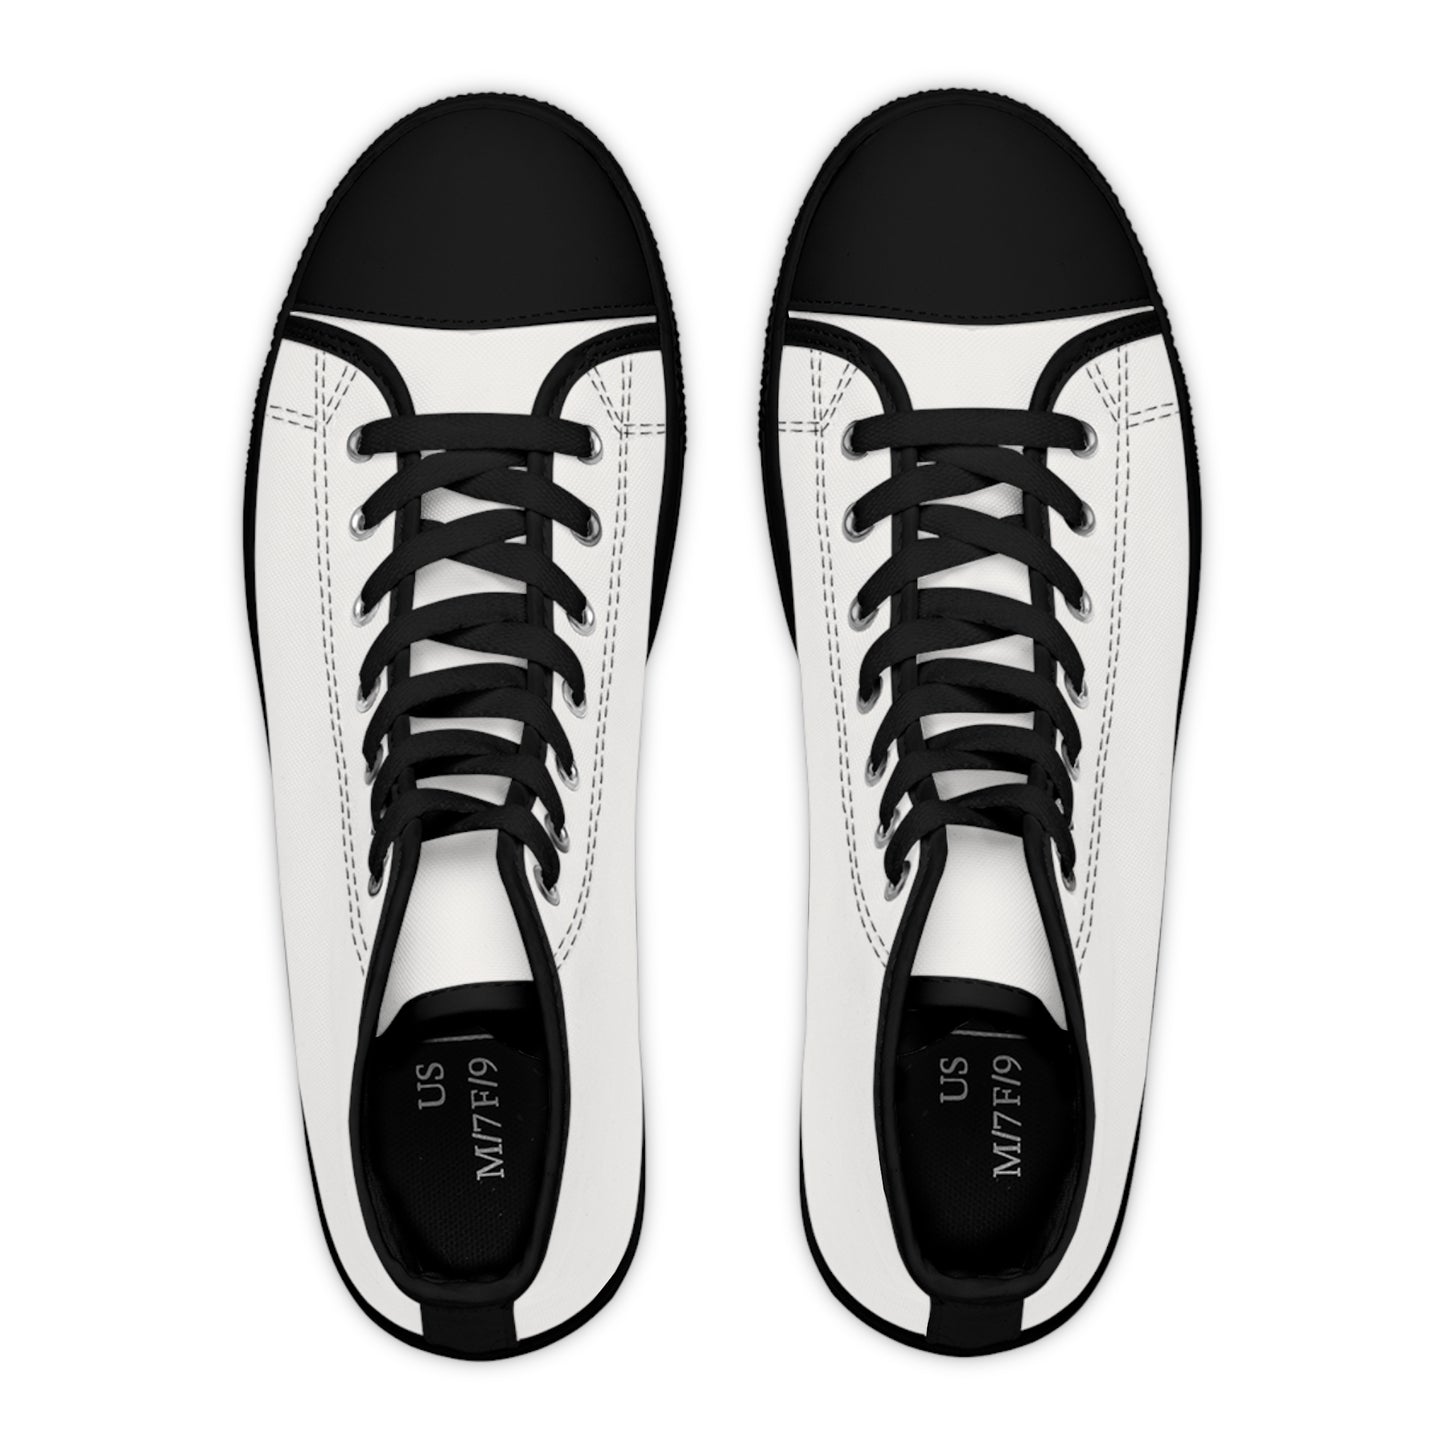 Women's High Top Sneakers - Template US 12 White sole